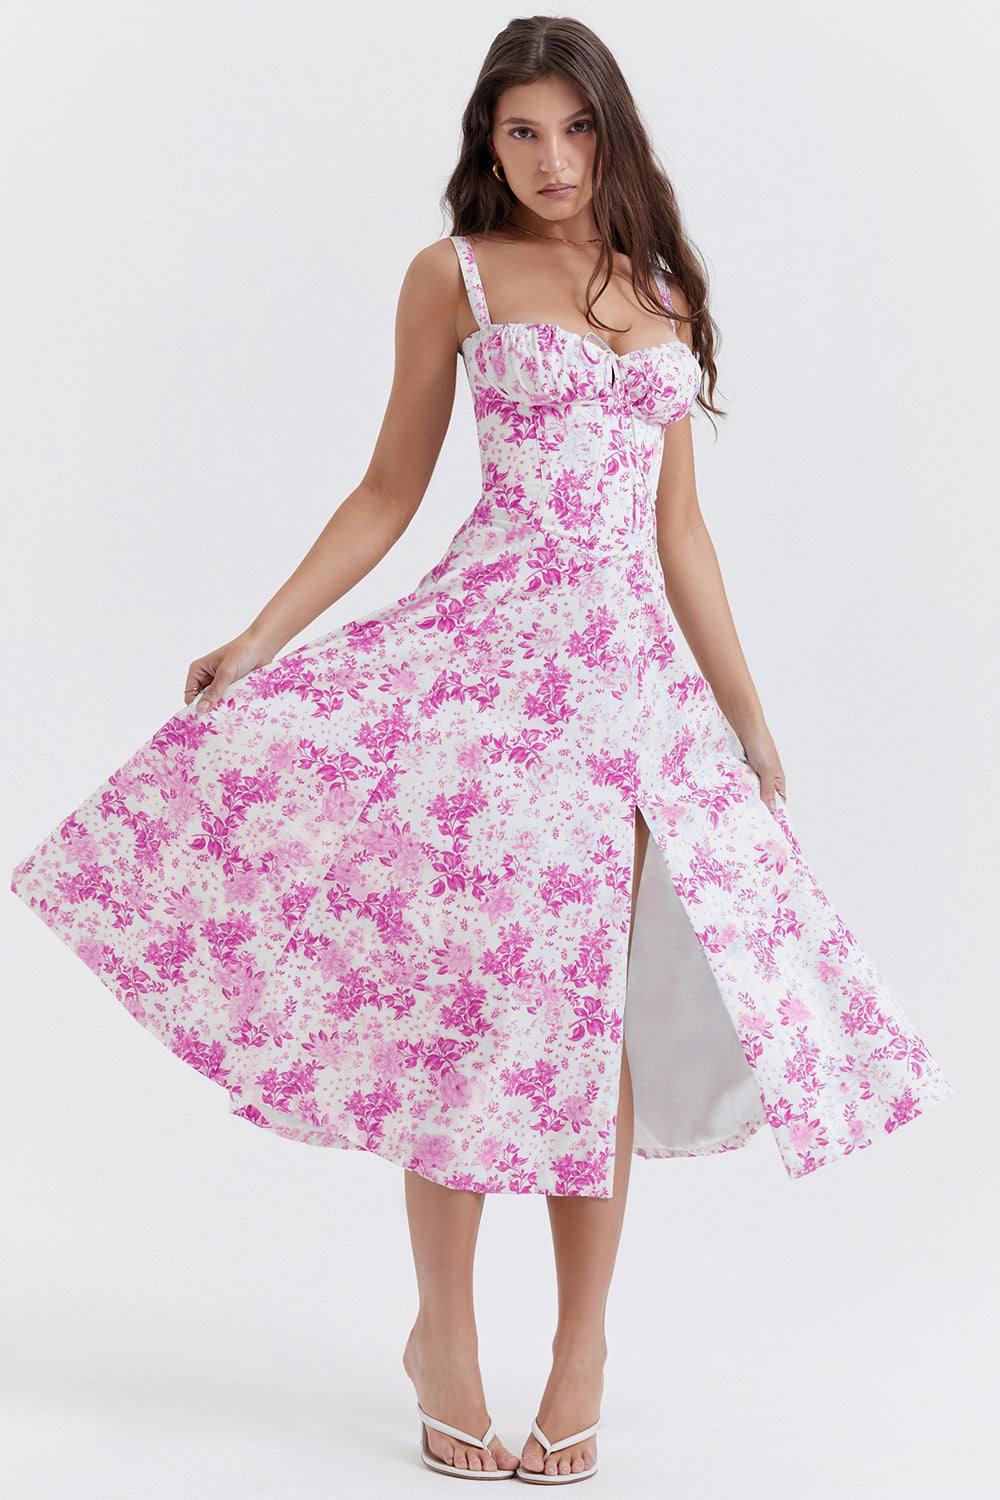 New Women's Floral Print Dress With Straps-White Rose-8